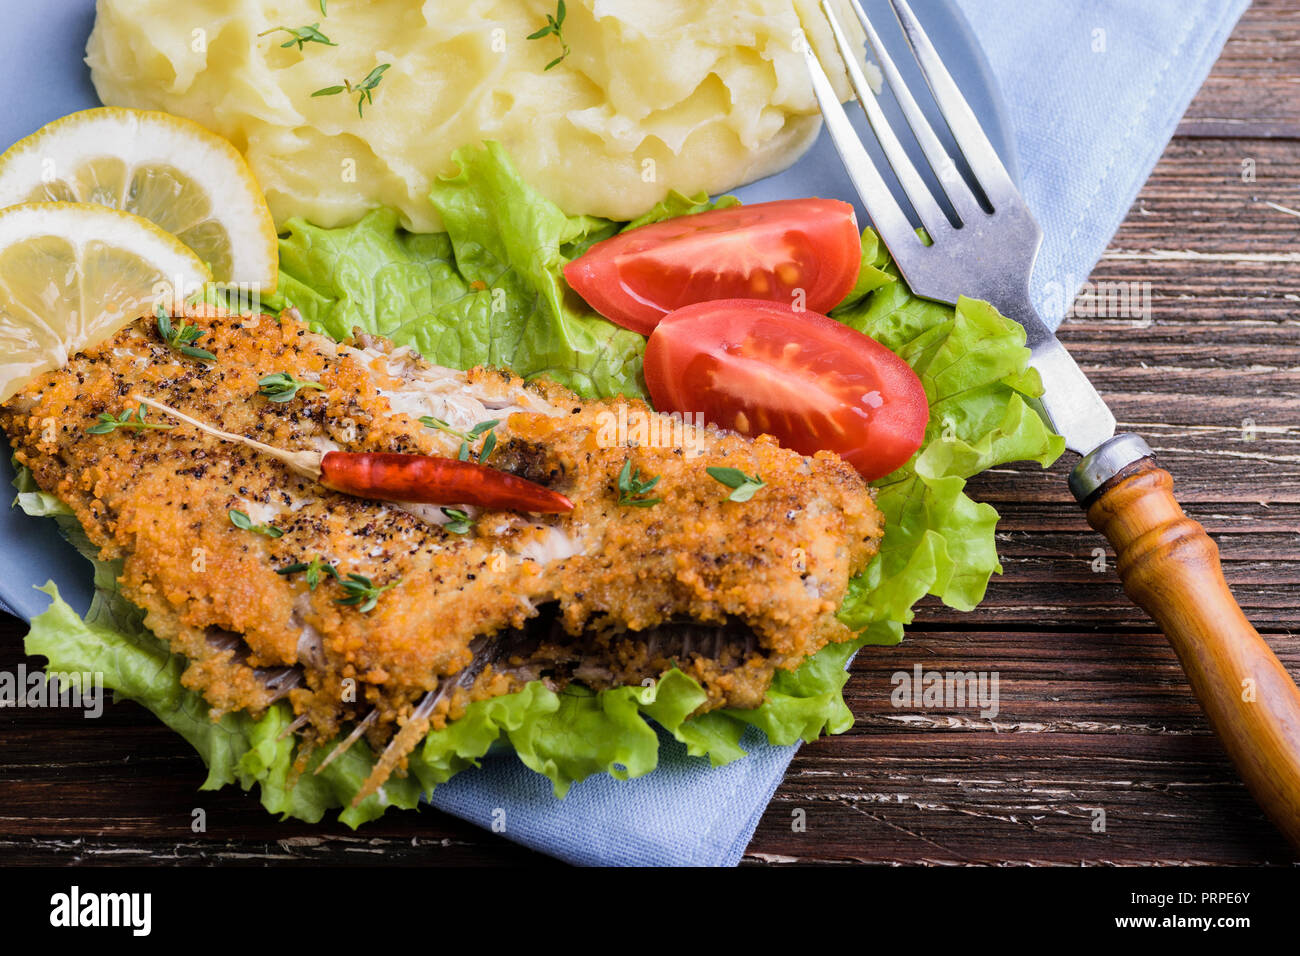 Fried flat fish on green lettuce with mashed potatoes, tomato, pepper and lemon slices in blue plate on dark rustic wooden background. Delicious dinne Stock Photo